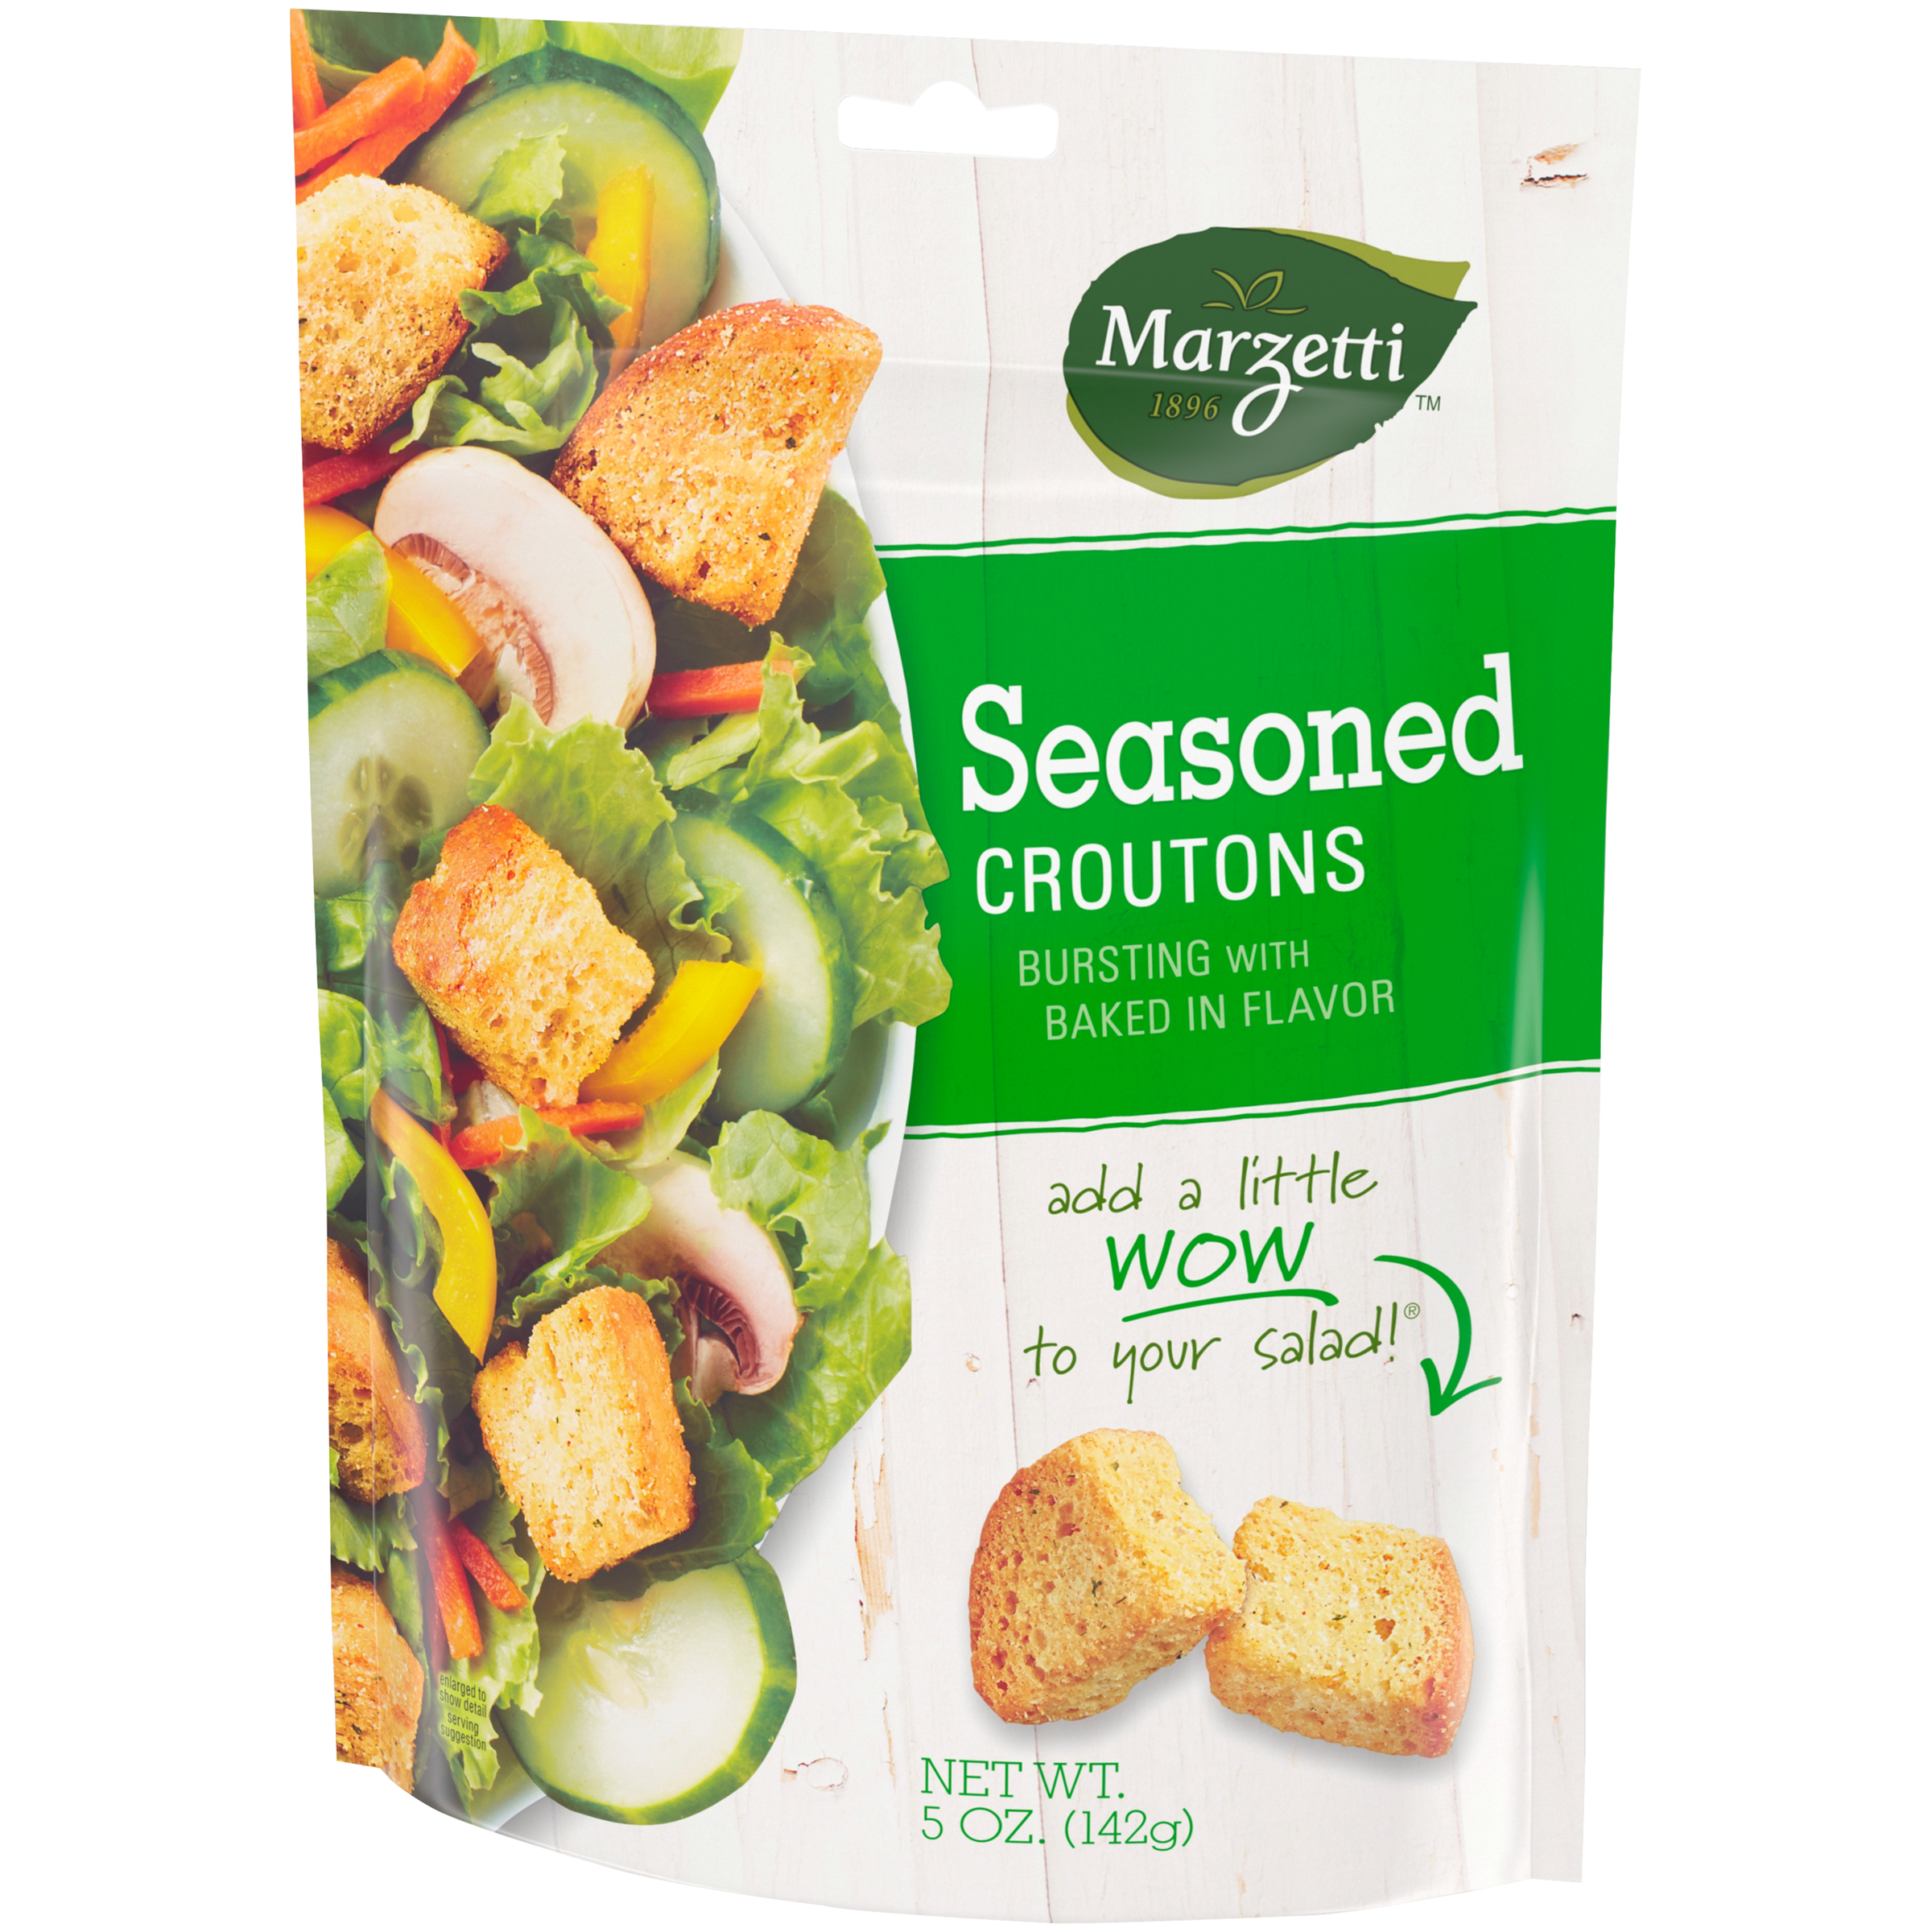 Marzetti Seasoned Croutons, 5 oz. Bag; Toppings for Salads & Soups - image 4 of 7